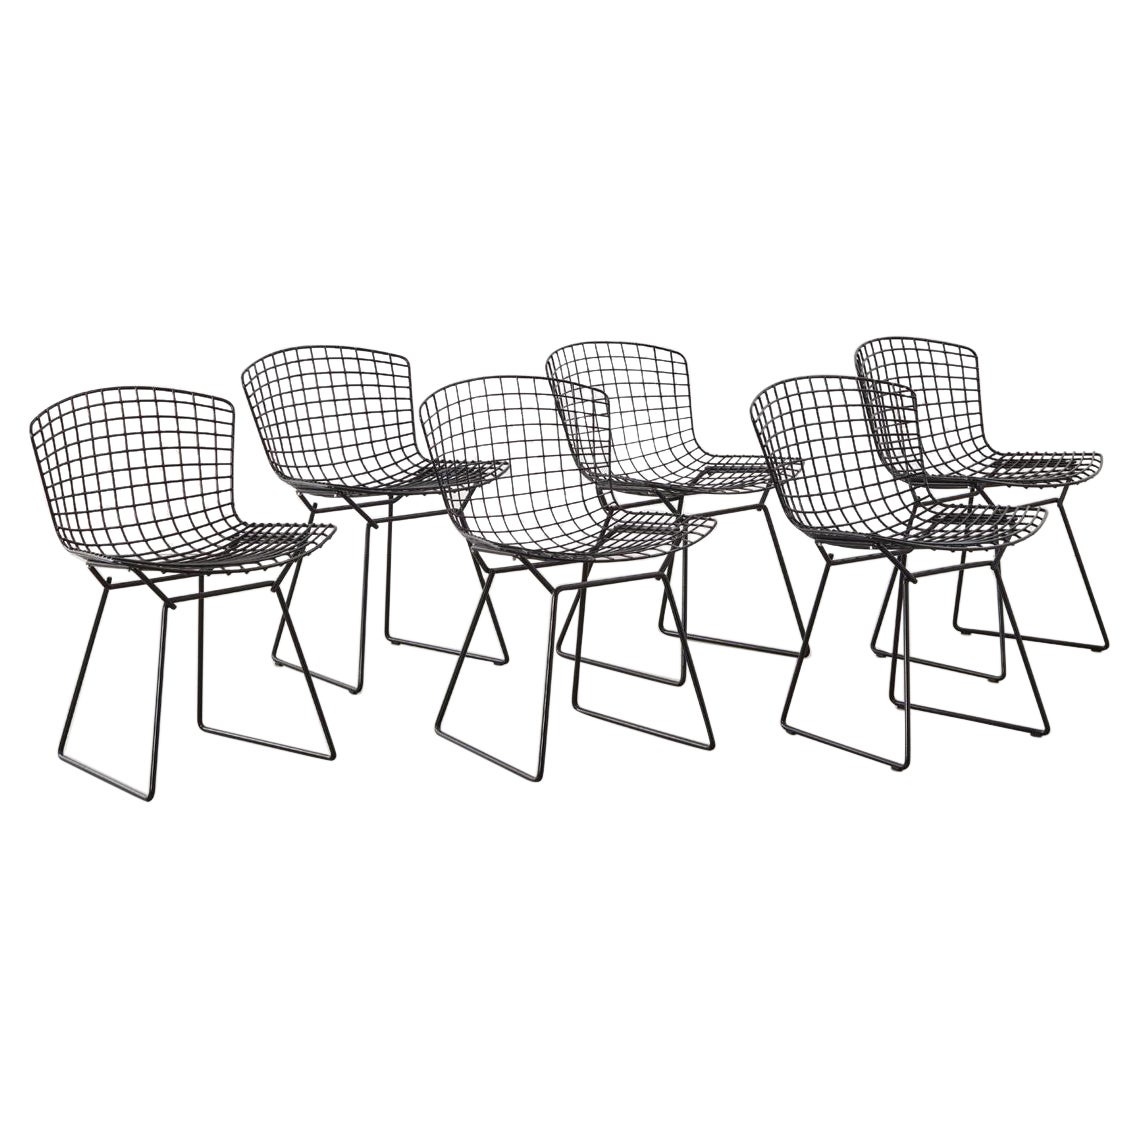 Harry Bertoia, Set of Six Chairs for Knoll USA, 1952